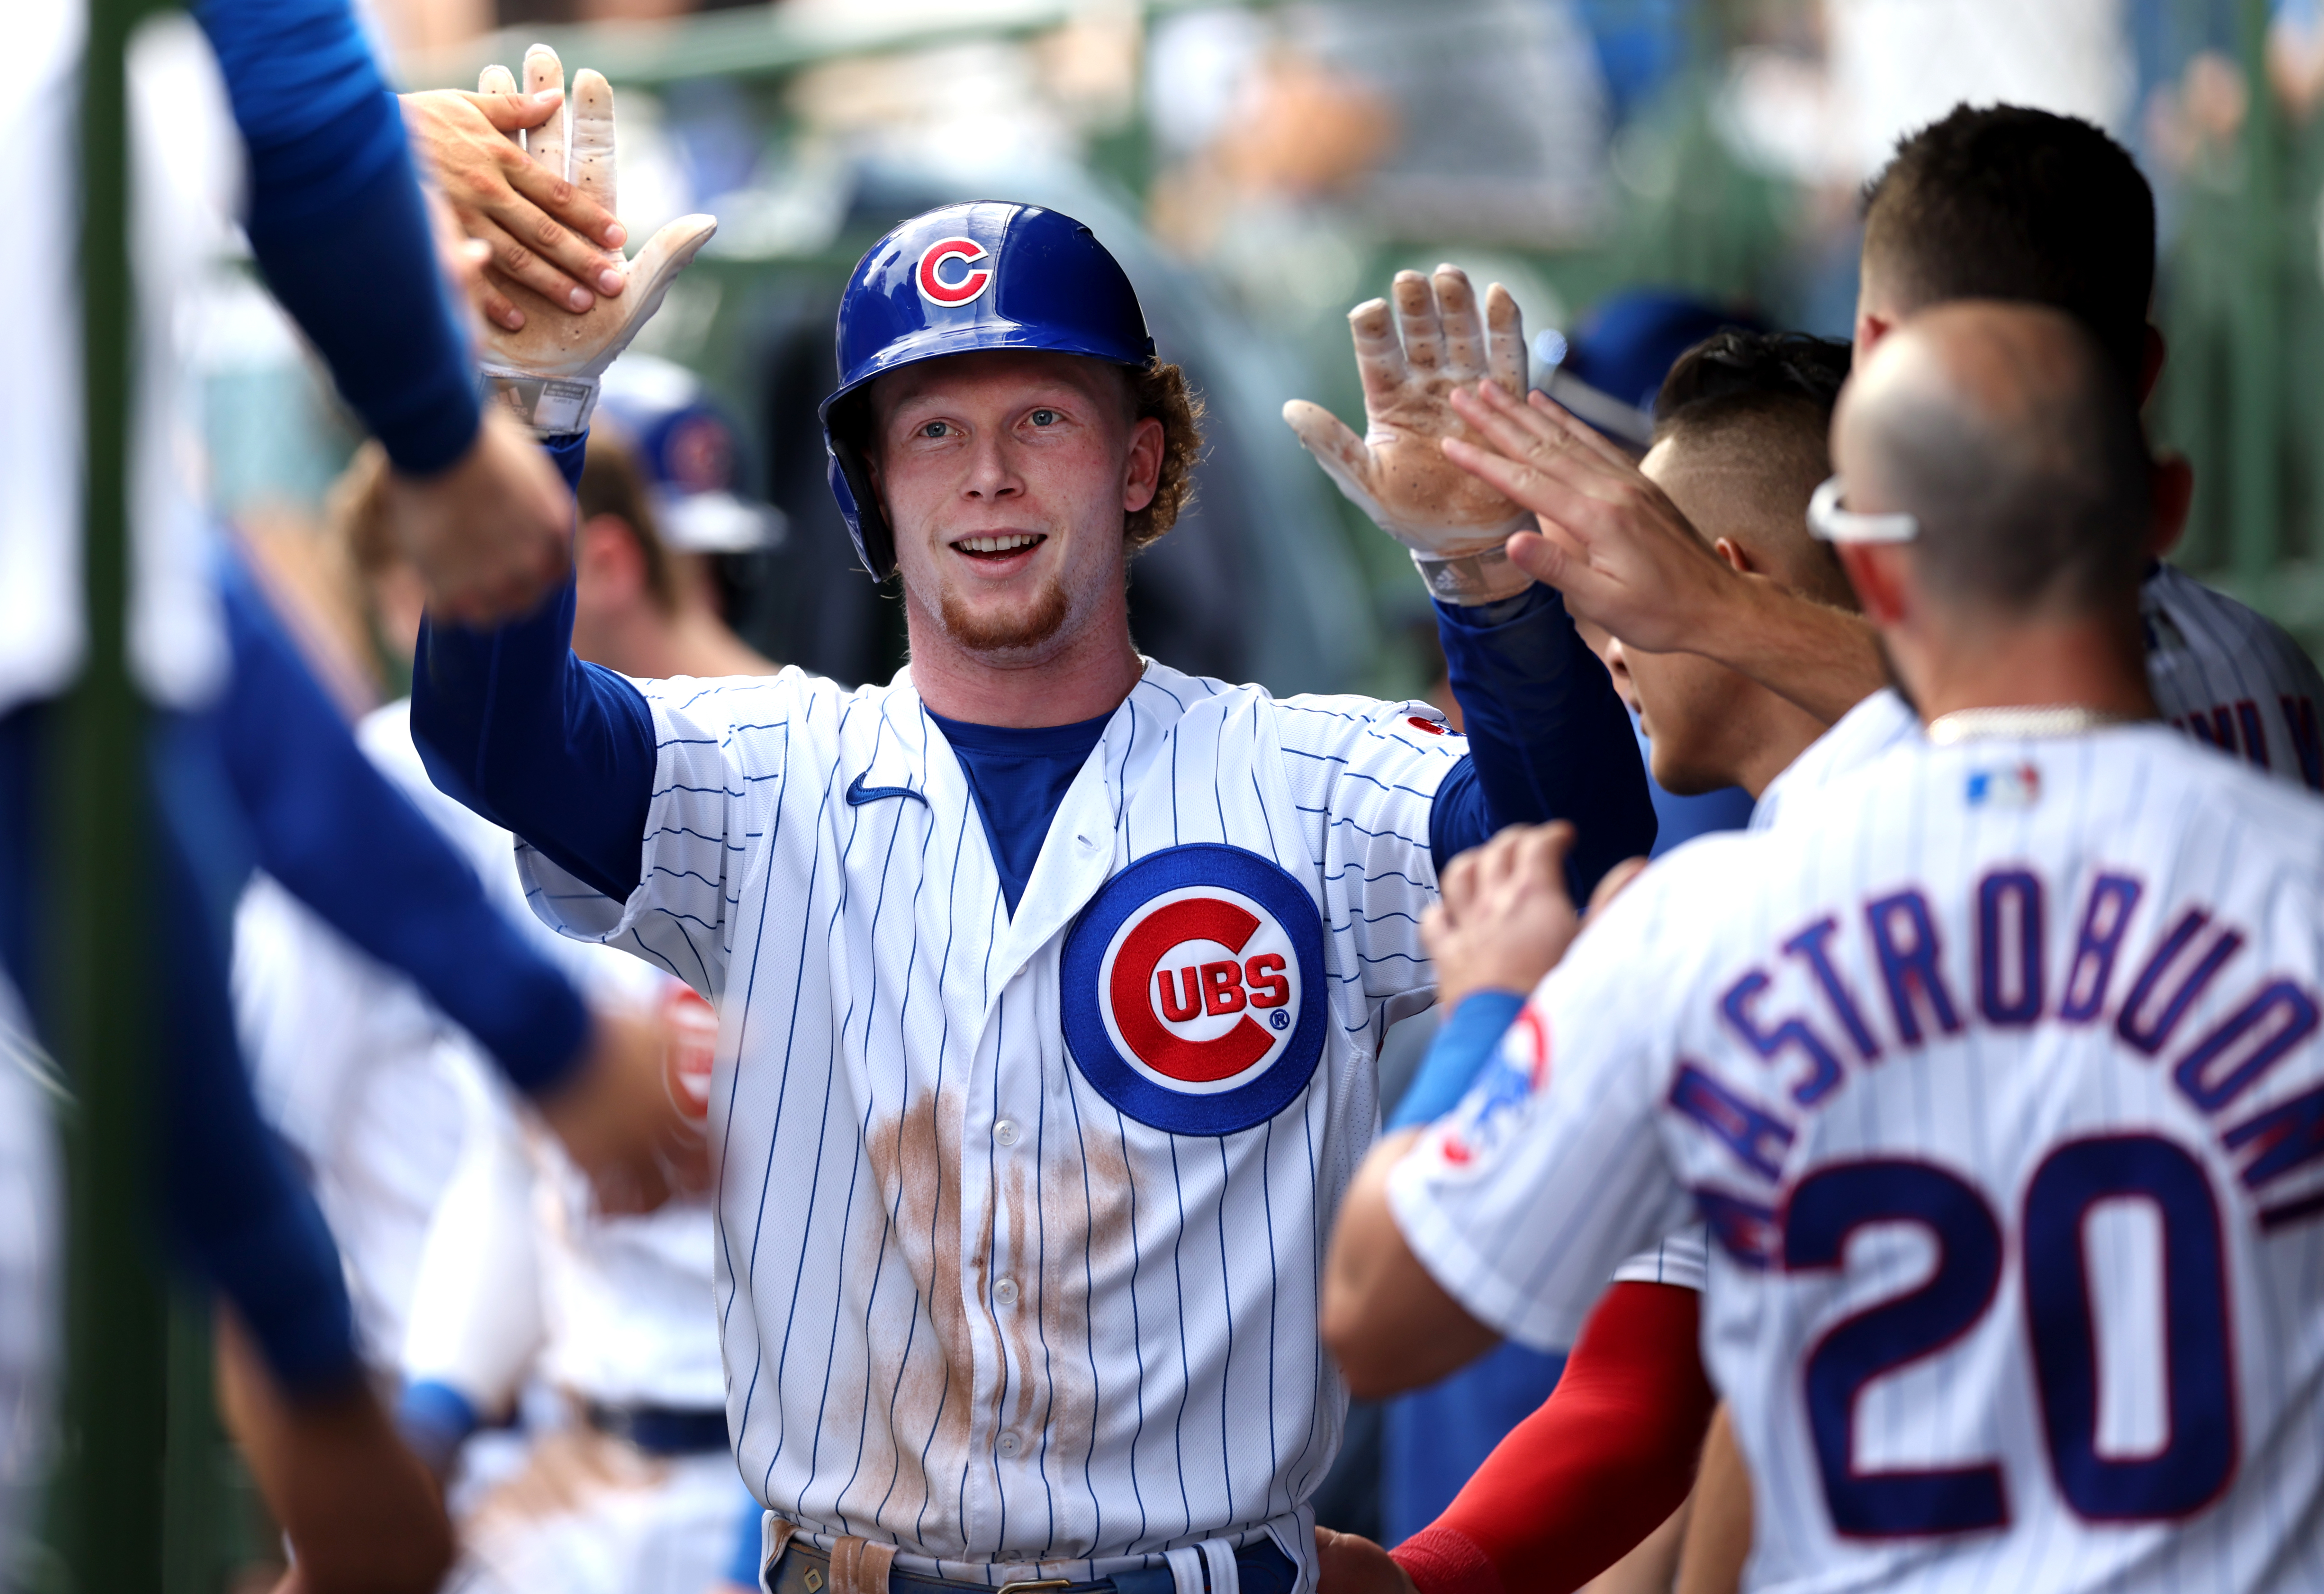 Pete Crow-Armstrong's Chicago Cubs debut 'a trip' for father